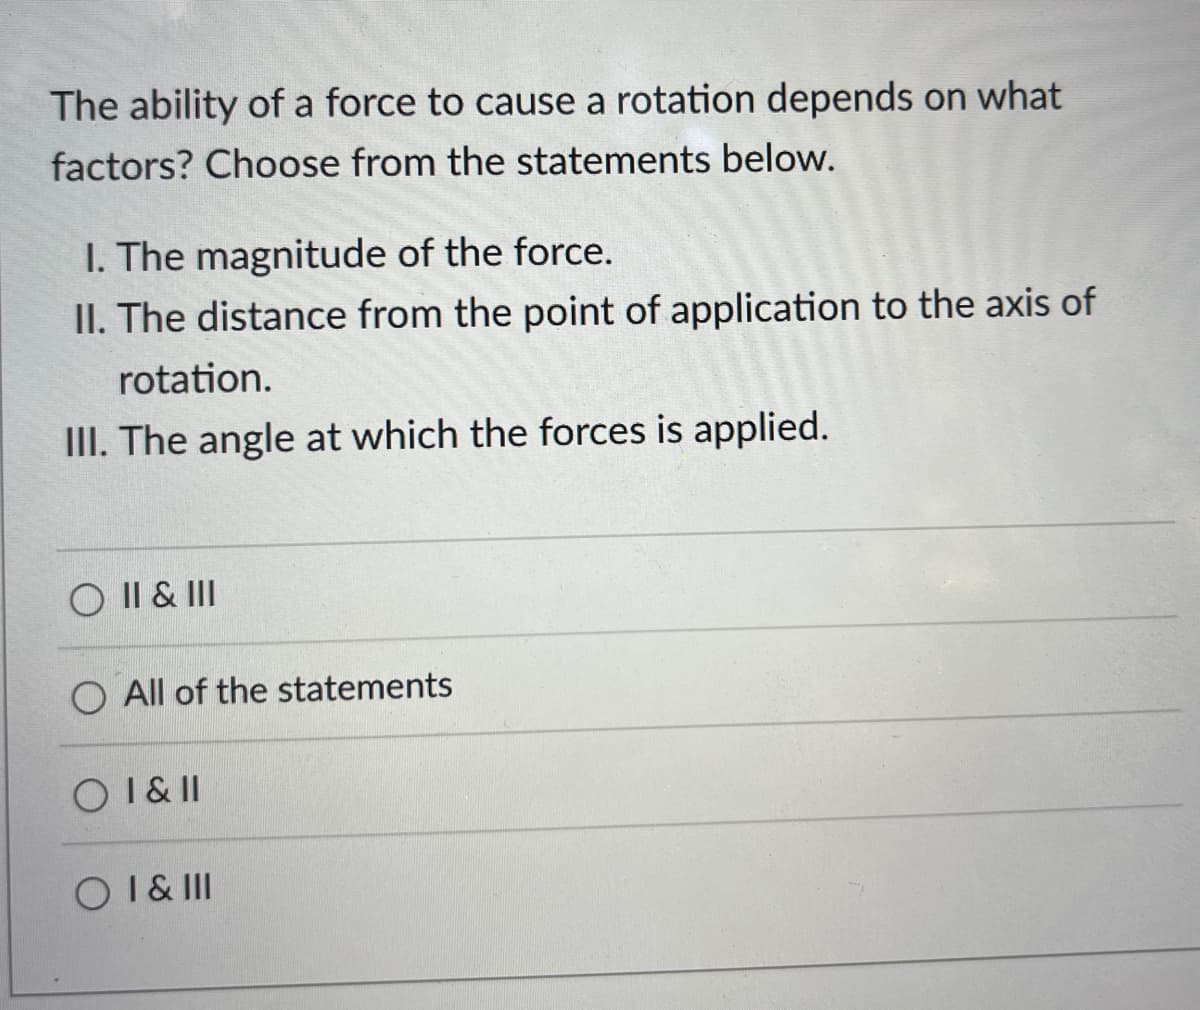 The ability of a force to cause a rotation depends on what
factors? Choose from the statements below.
1. The magnitude of the force.
II. The distance from the point of application to the axis of
rotation.
III. The angle at which the forces is applied.
O II & III
O All of the statements
O I & II
O I & III